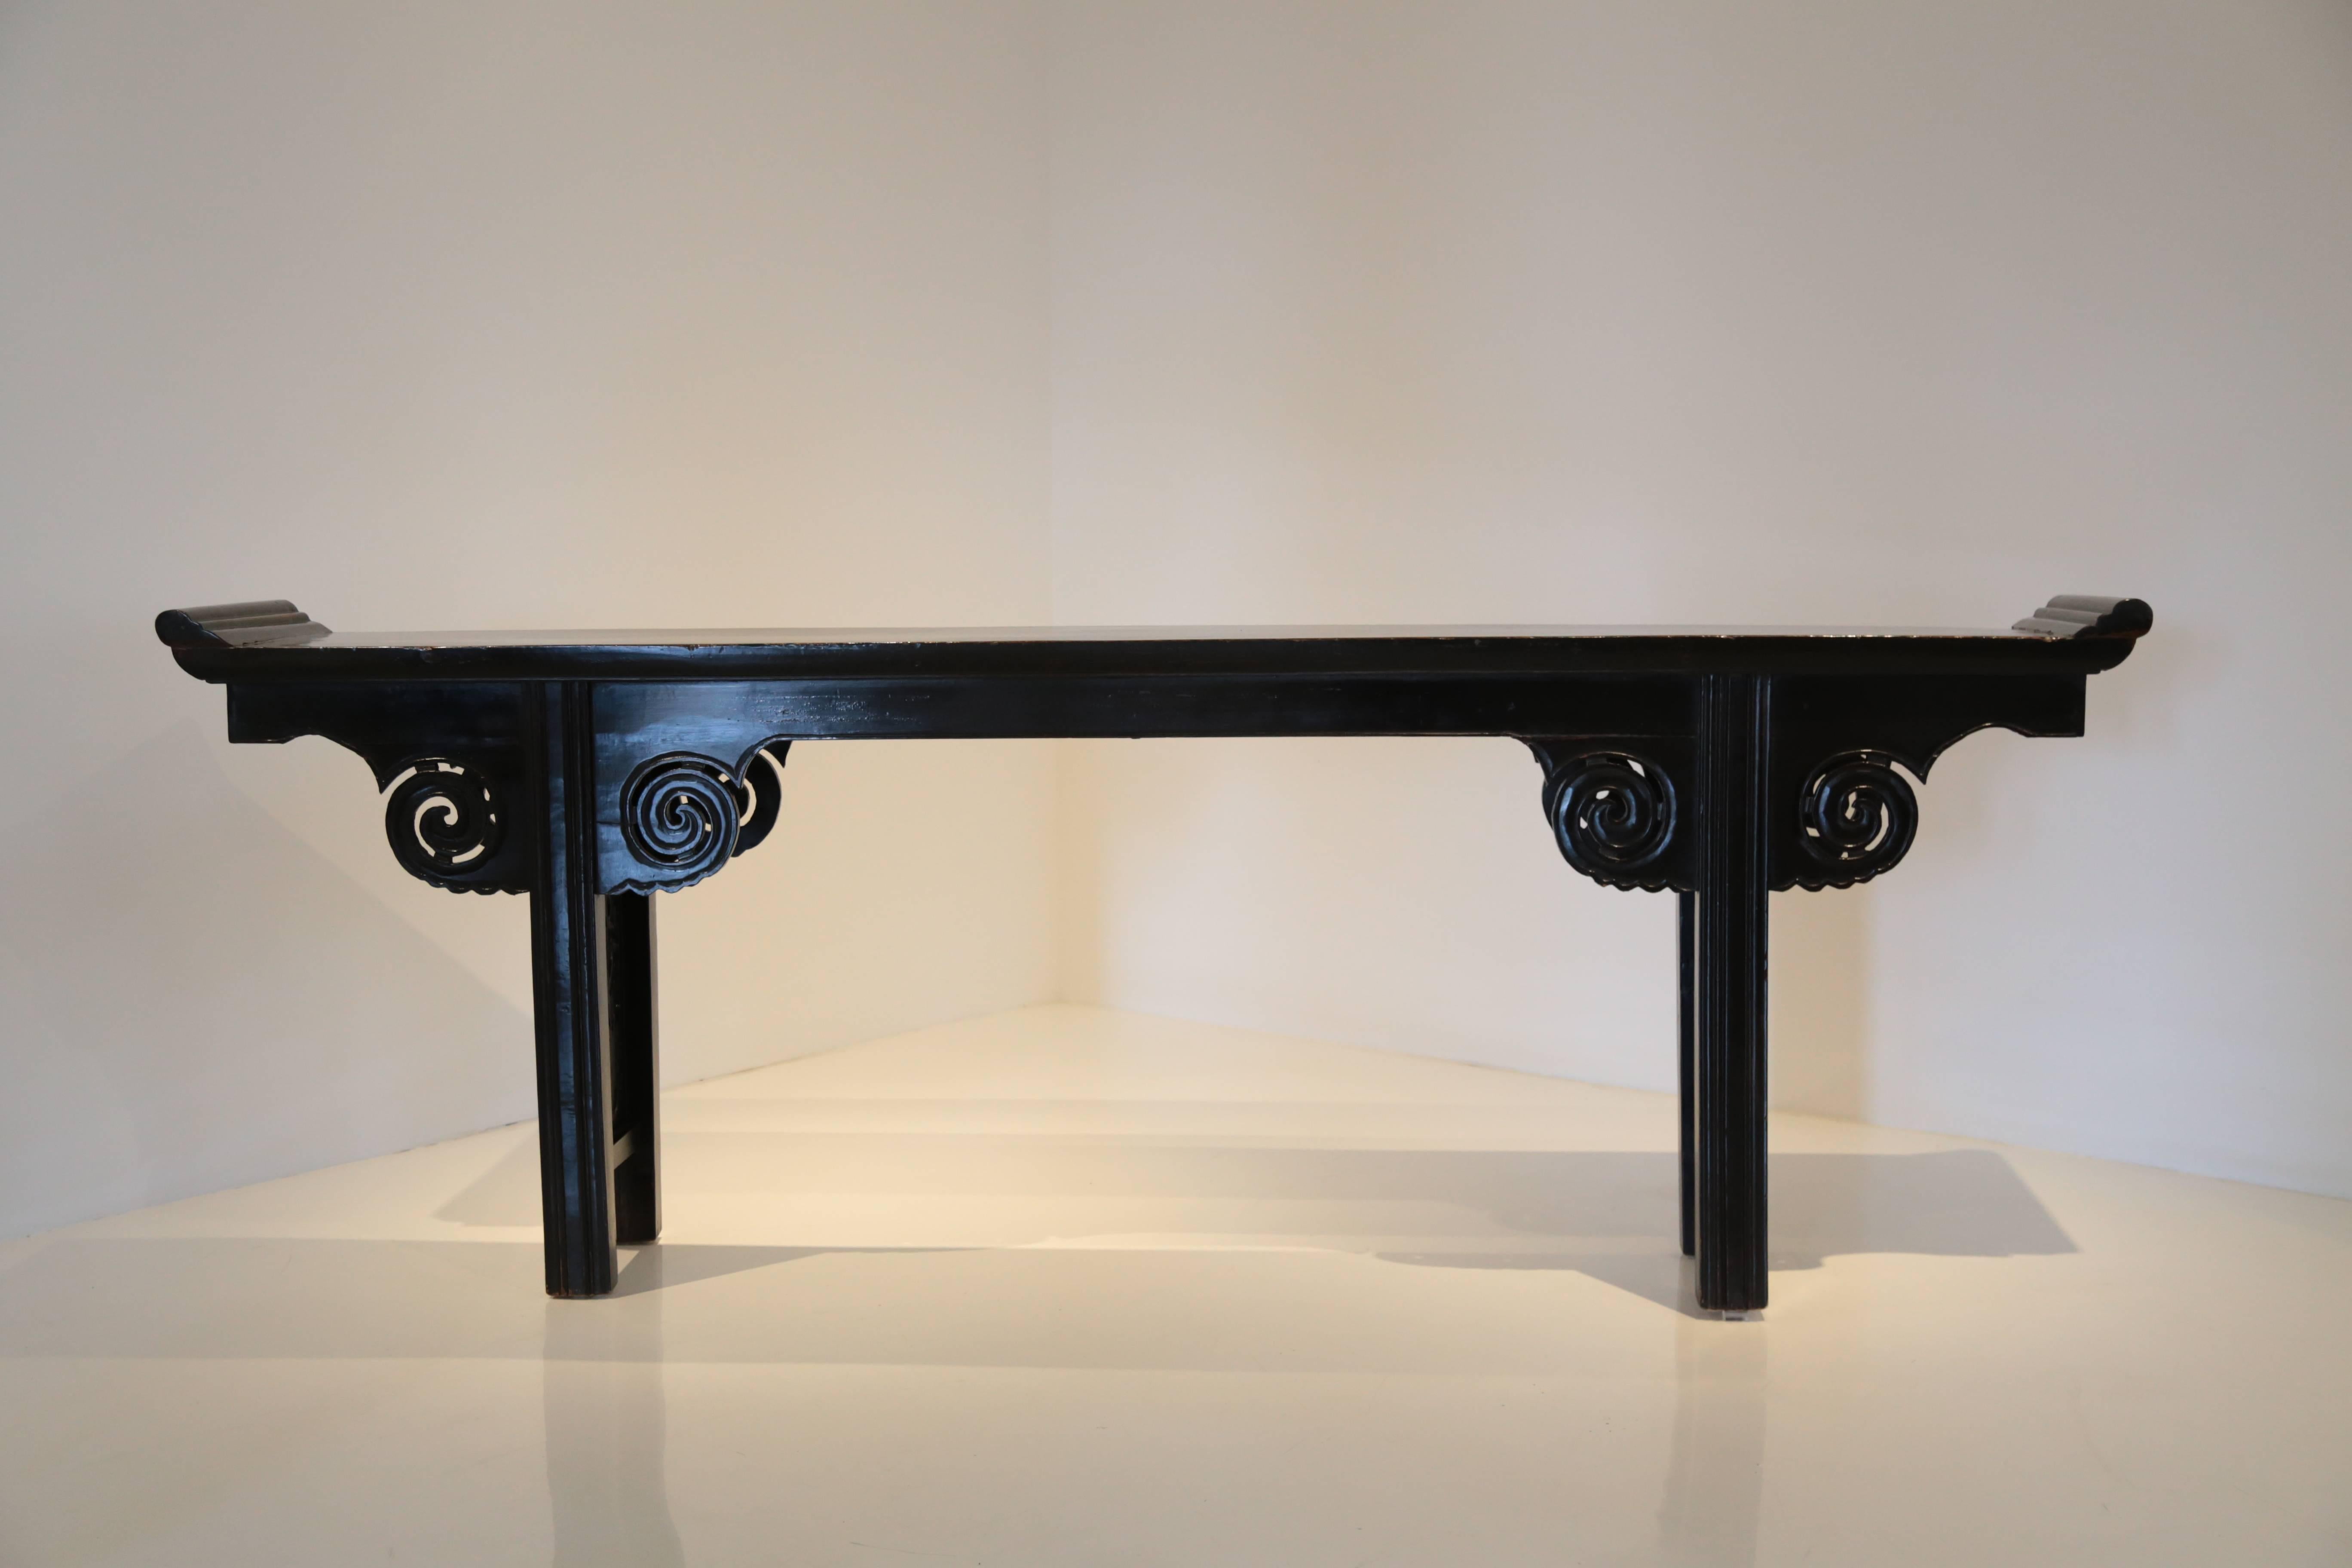  A 19th century Chinese Altar Table, console table.  Exquisite Black Lacquer Chinese Altar Table.  Details carved spandrels of auspicious billowing clouds rest beneath a solid one piece top with everted flanges opening to the heavens.   Carved Penny